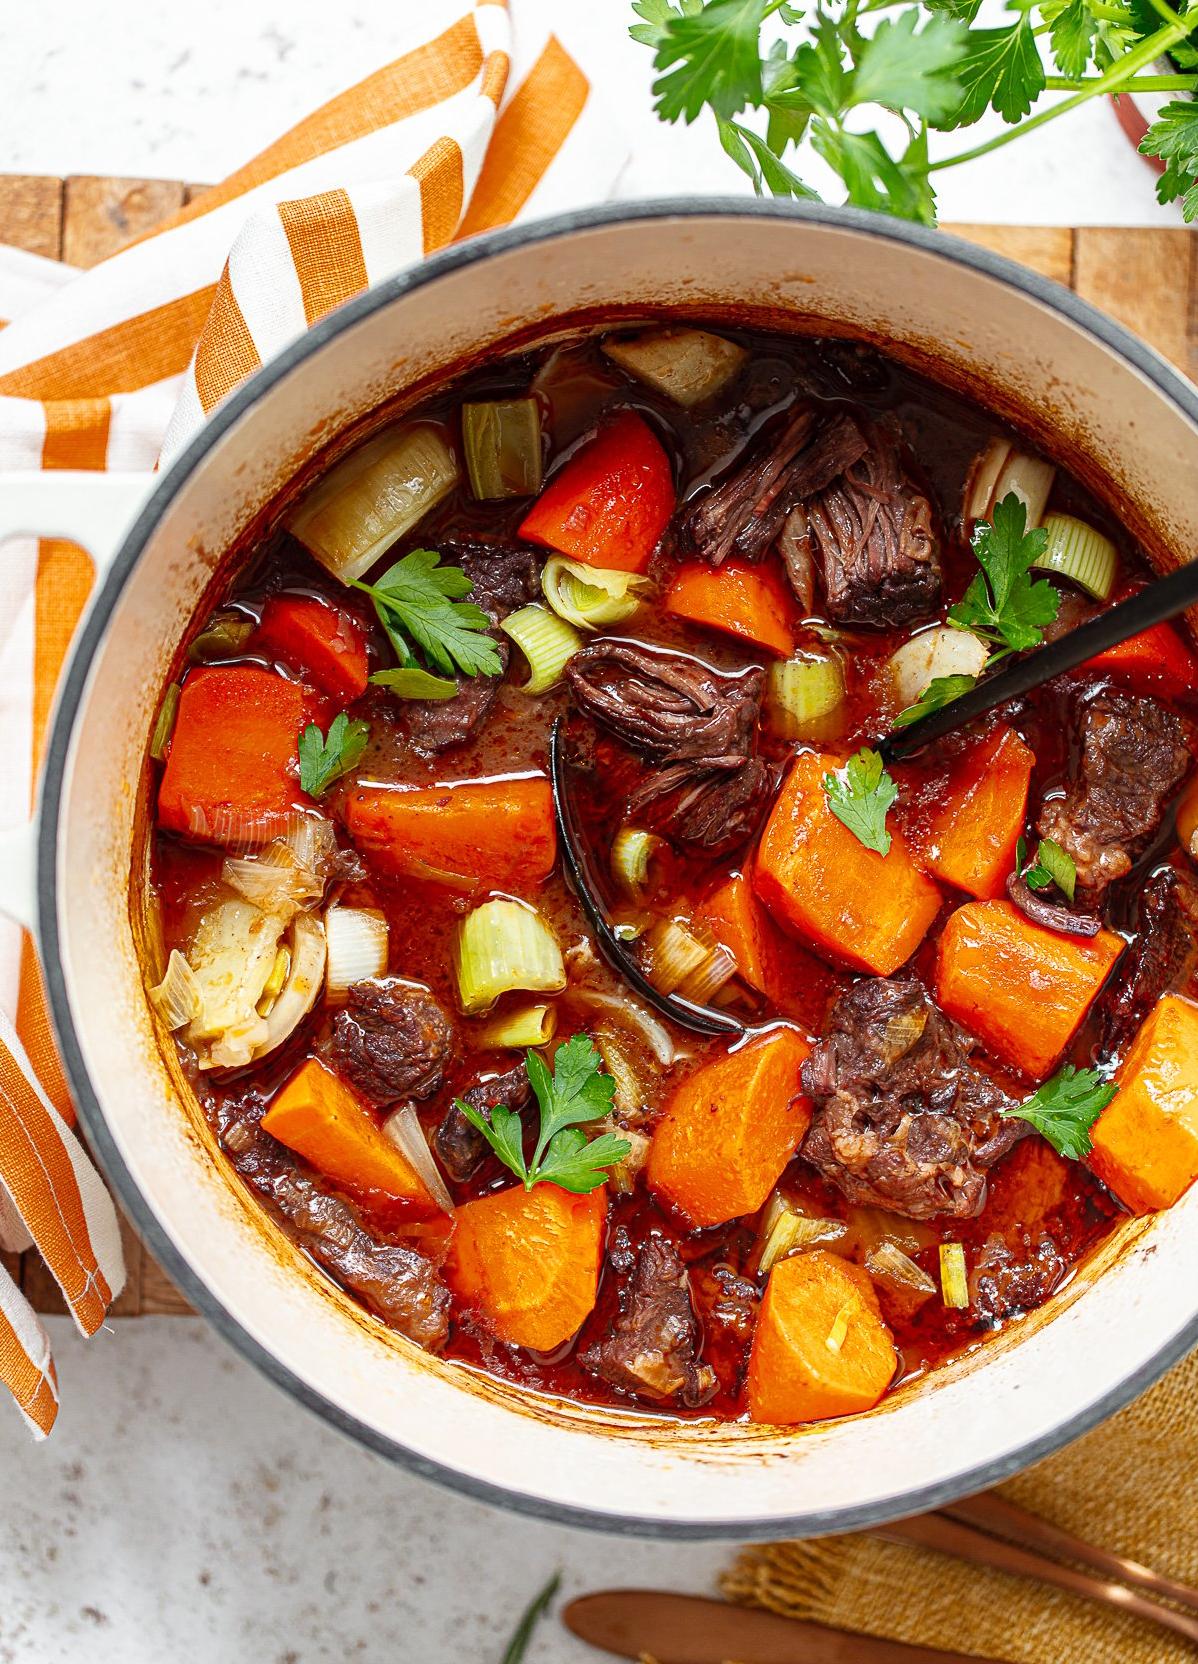  This is not your average stew; the red wine takes it to another level!